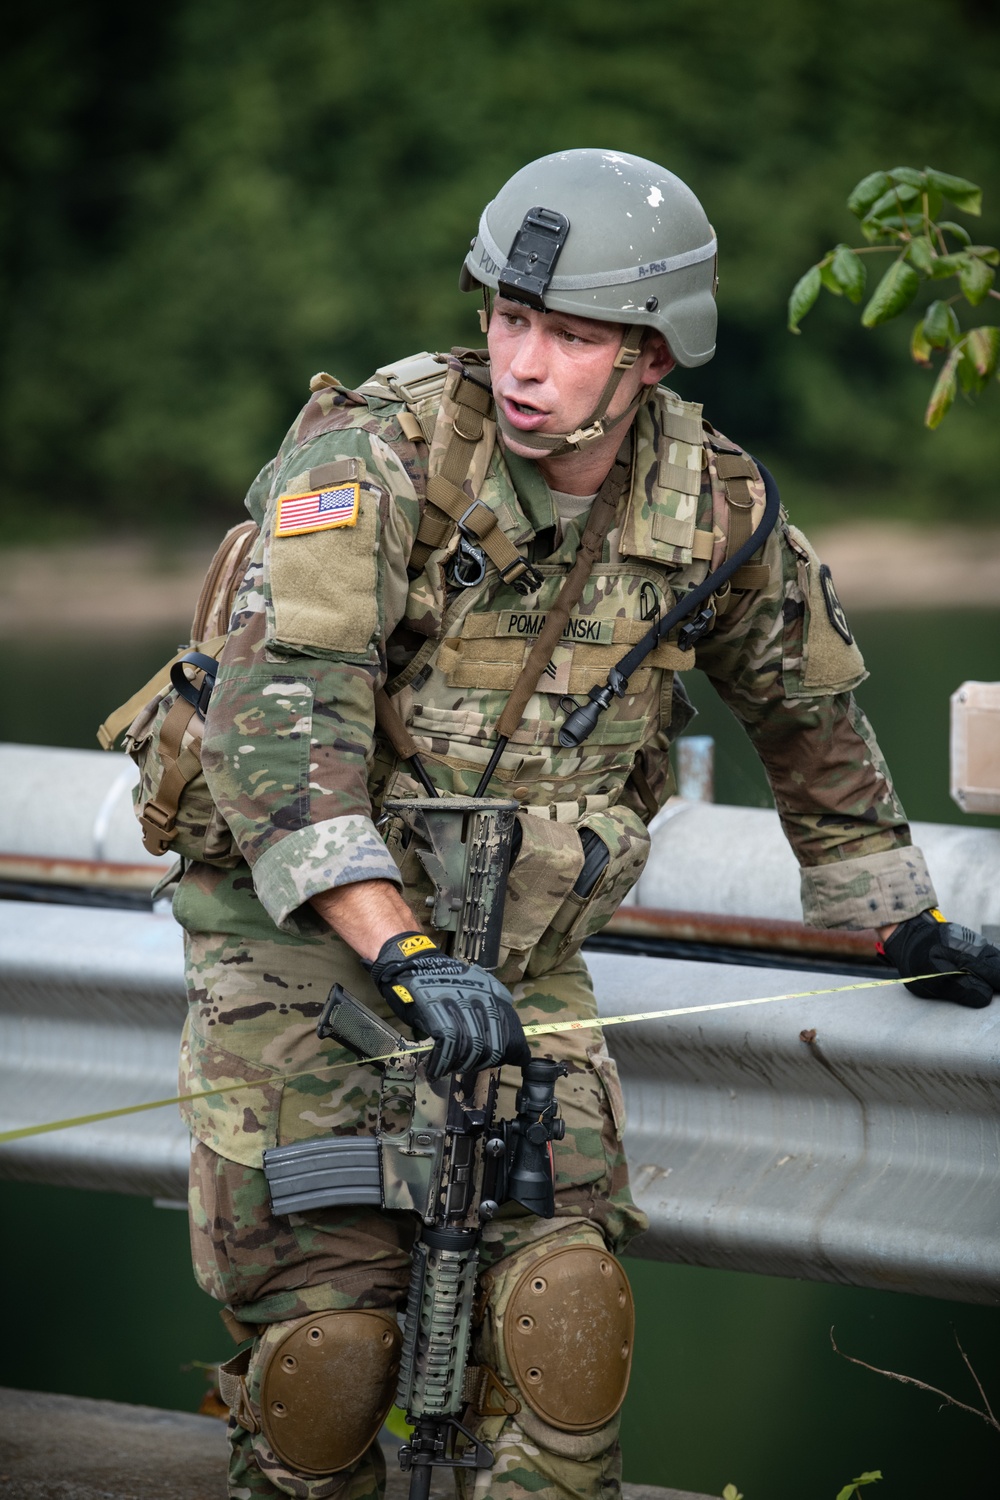 119th Engineer Company (Sapper) Conducts METL Training